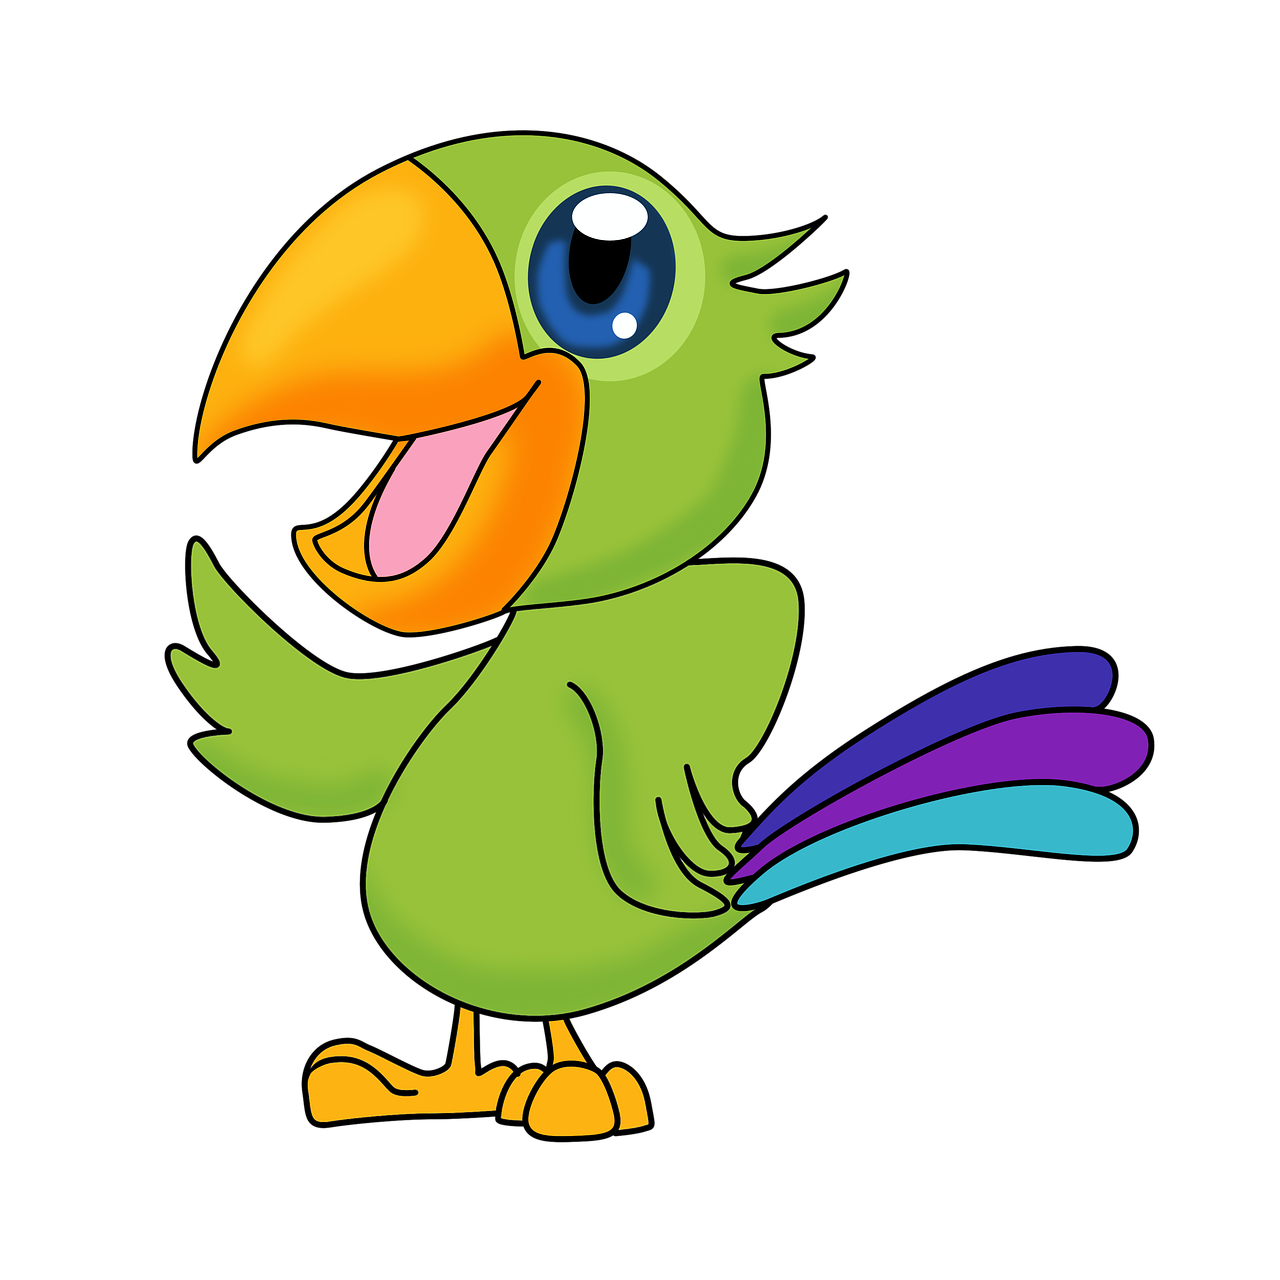 Branches On The Parrot  Parrot cartoon Parrot image Parrot drawing   Clip Art Library